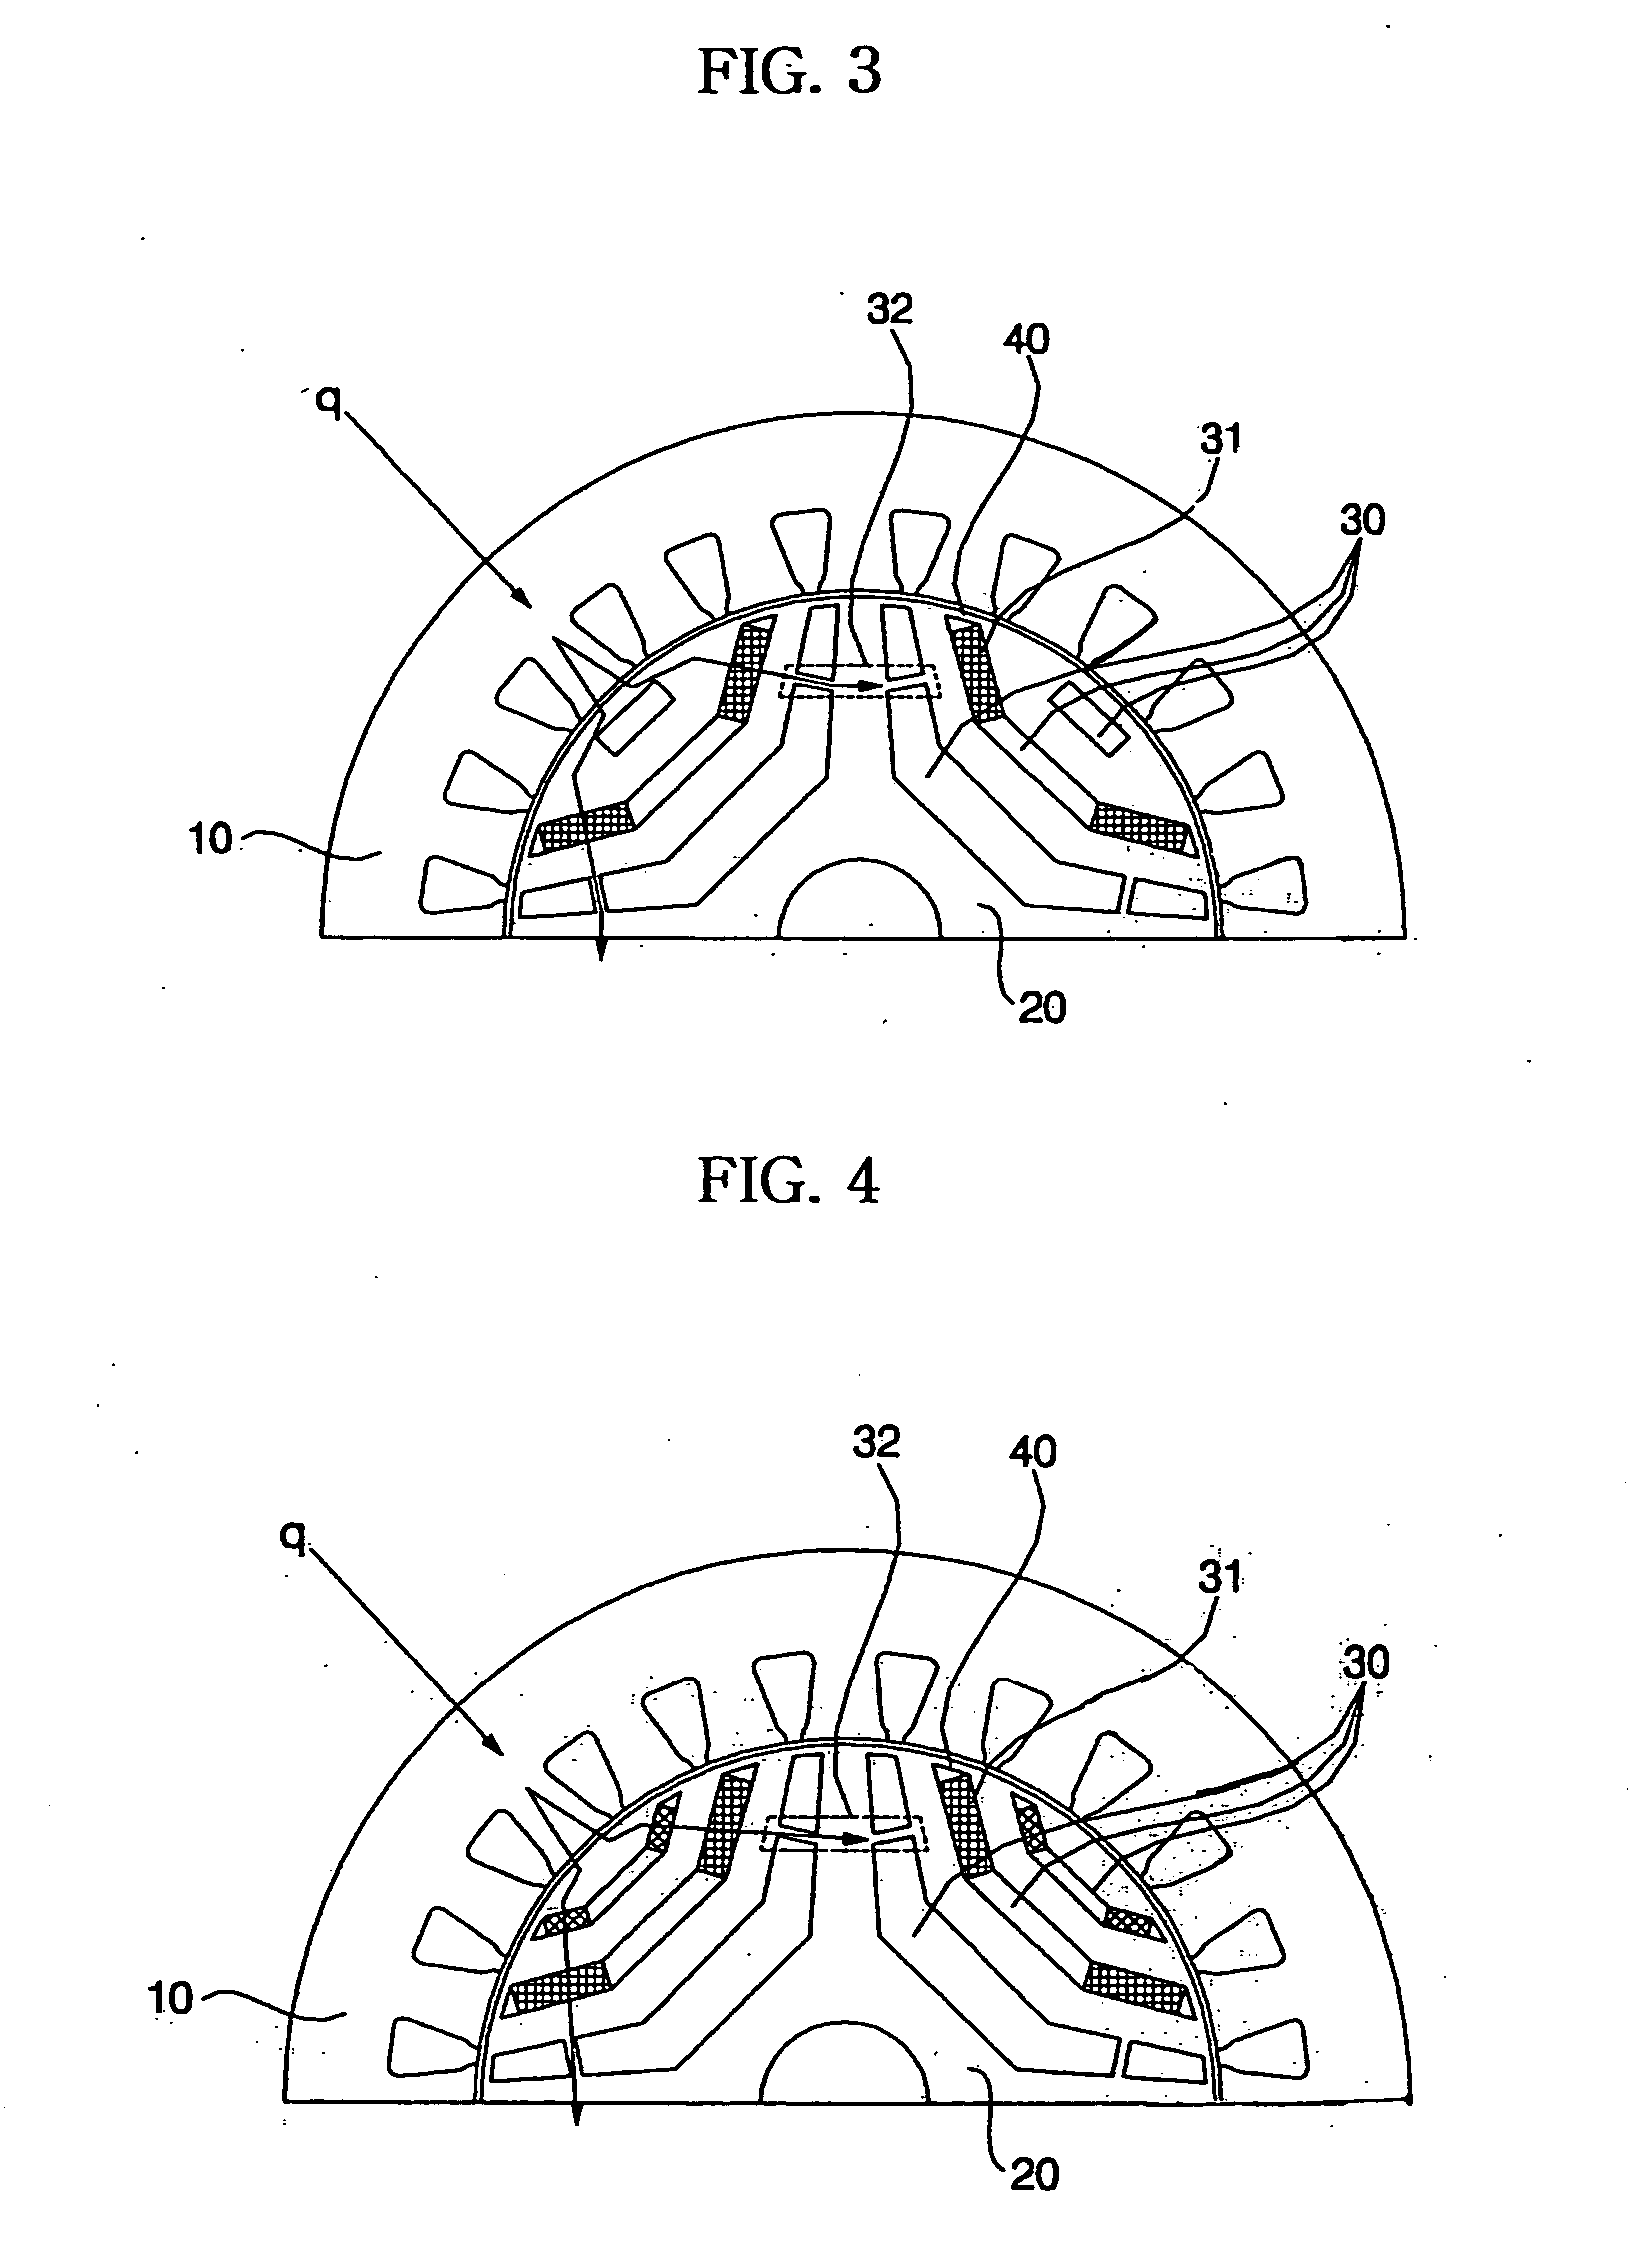 Permanent magnet assisted synRM and method for imposing magnetic force thereon